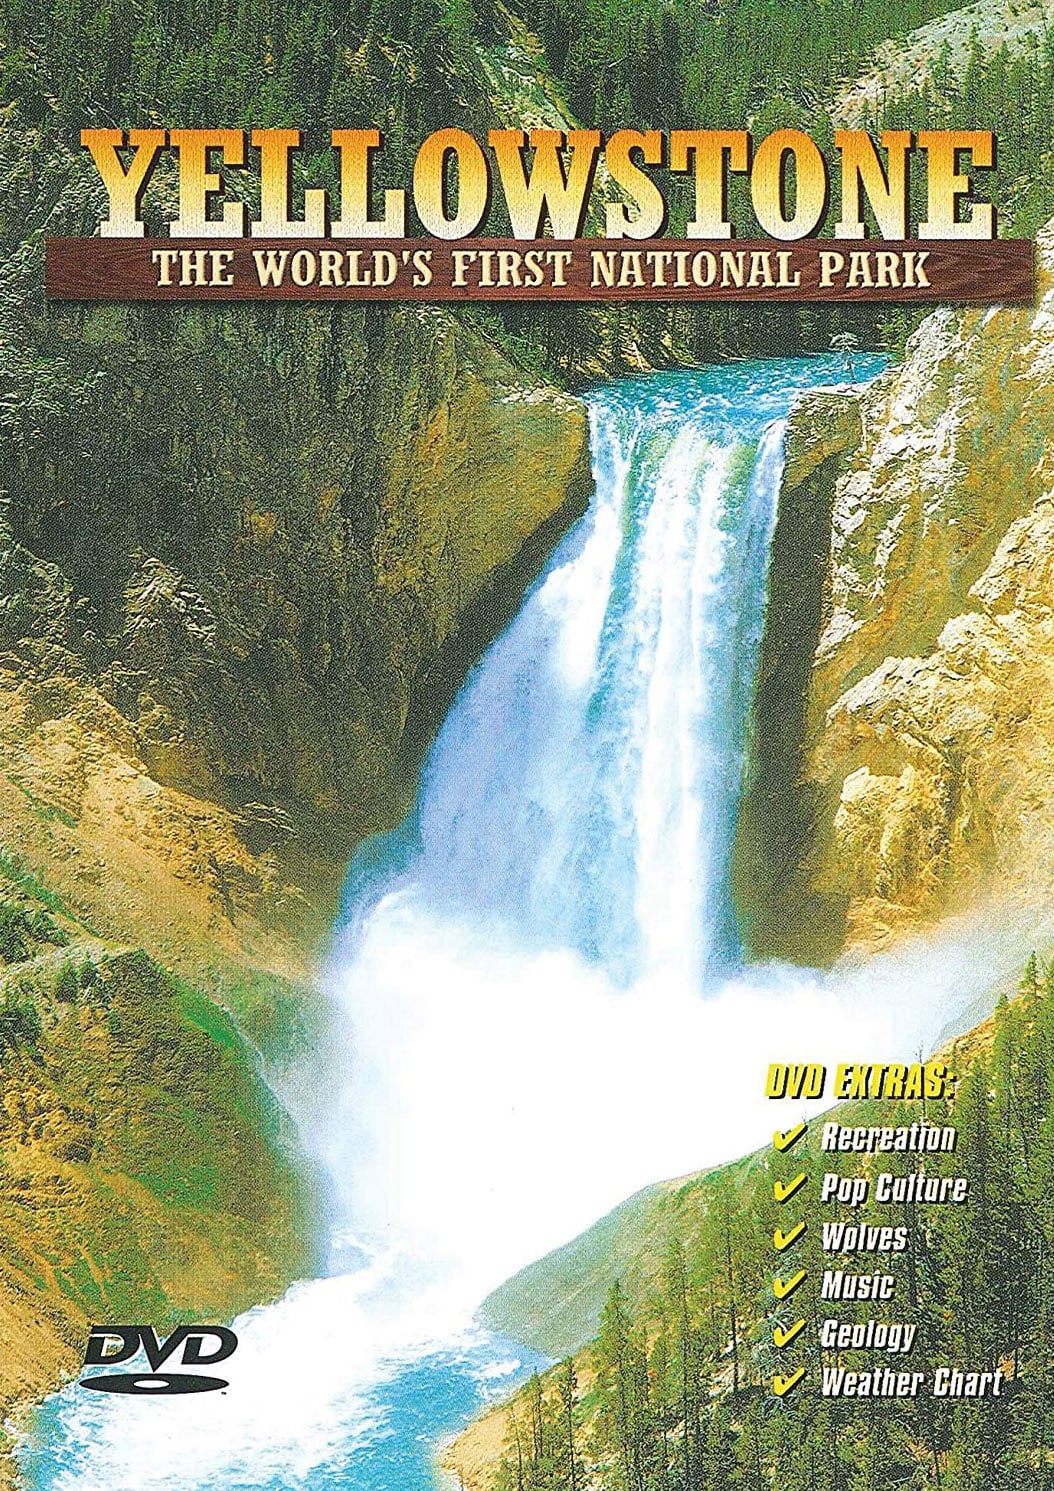 Yellowstone: The World's First National Park